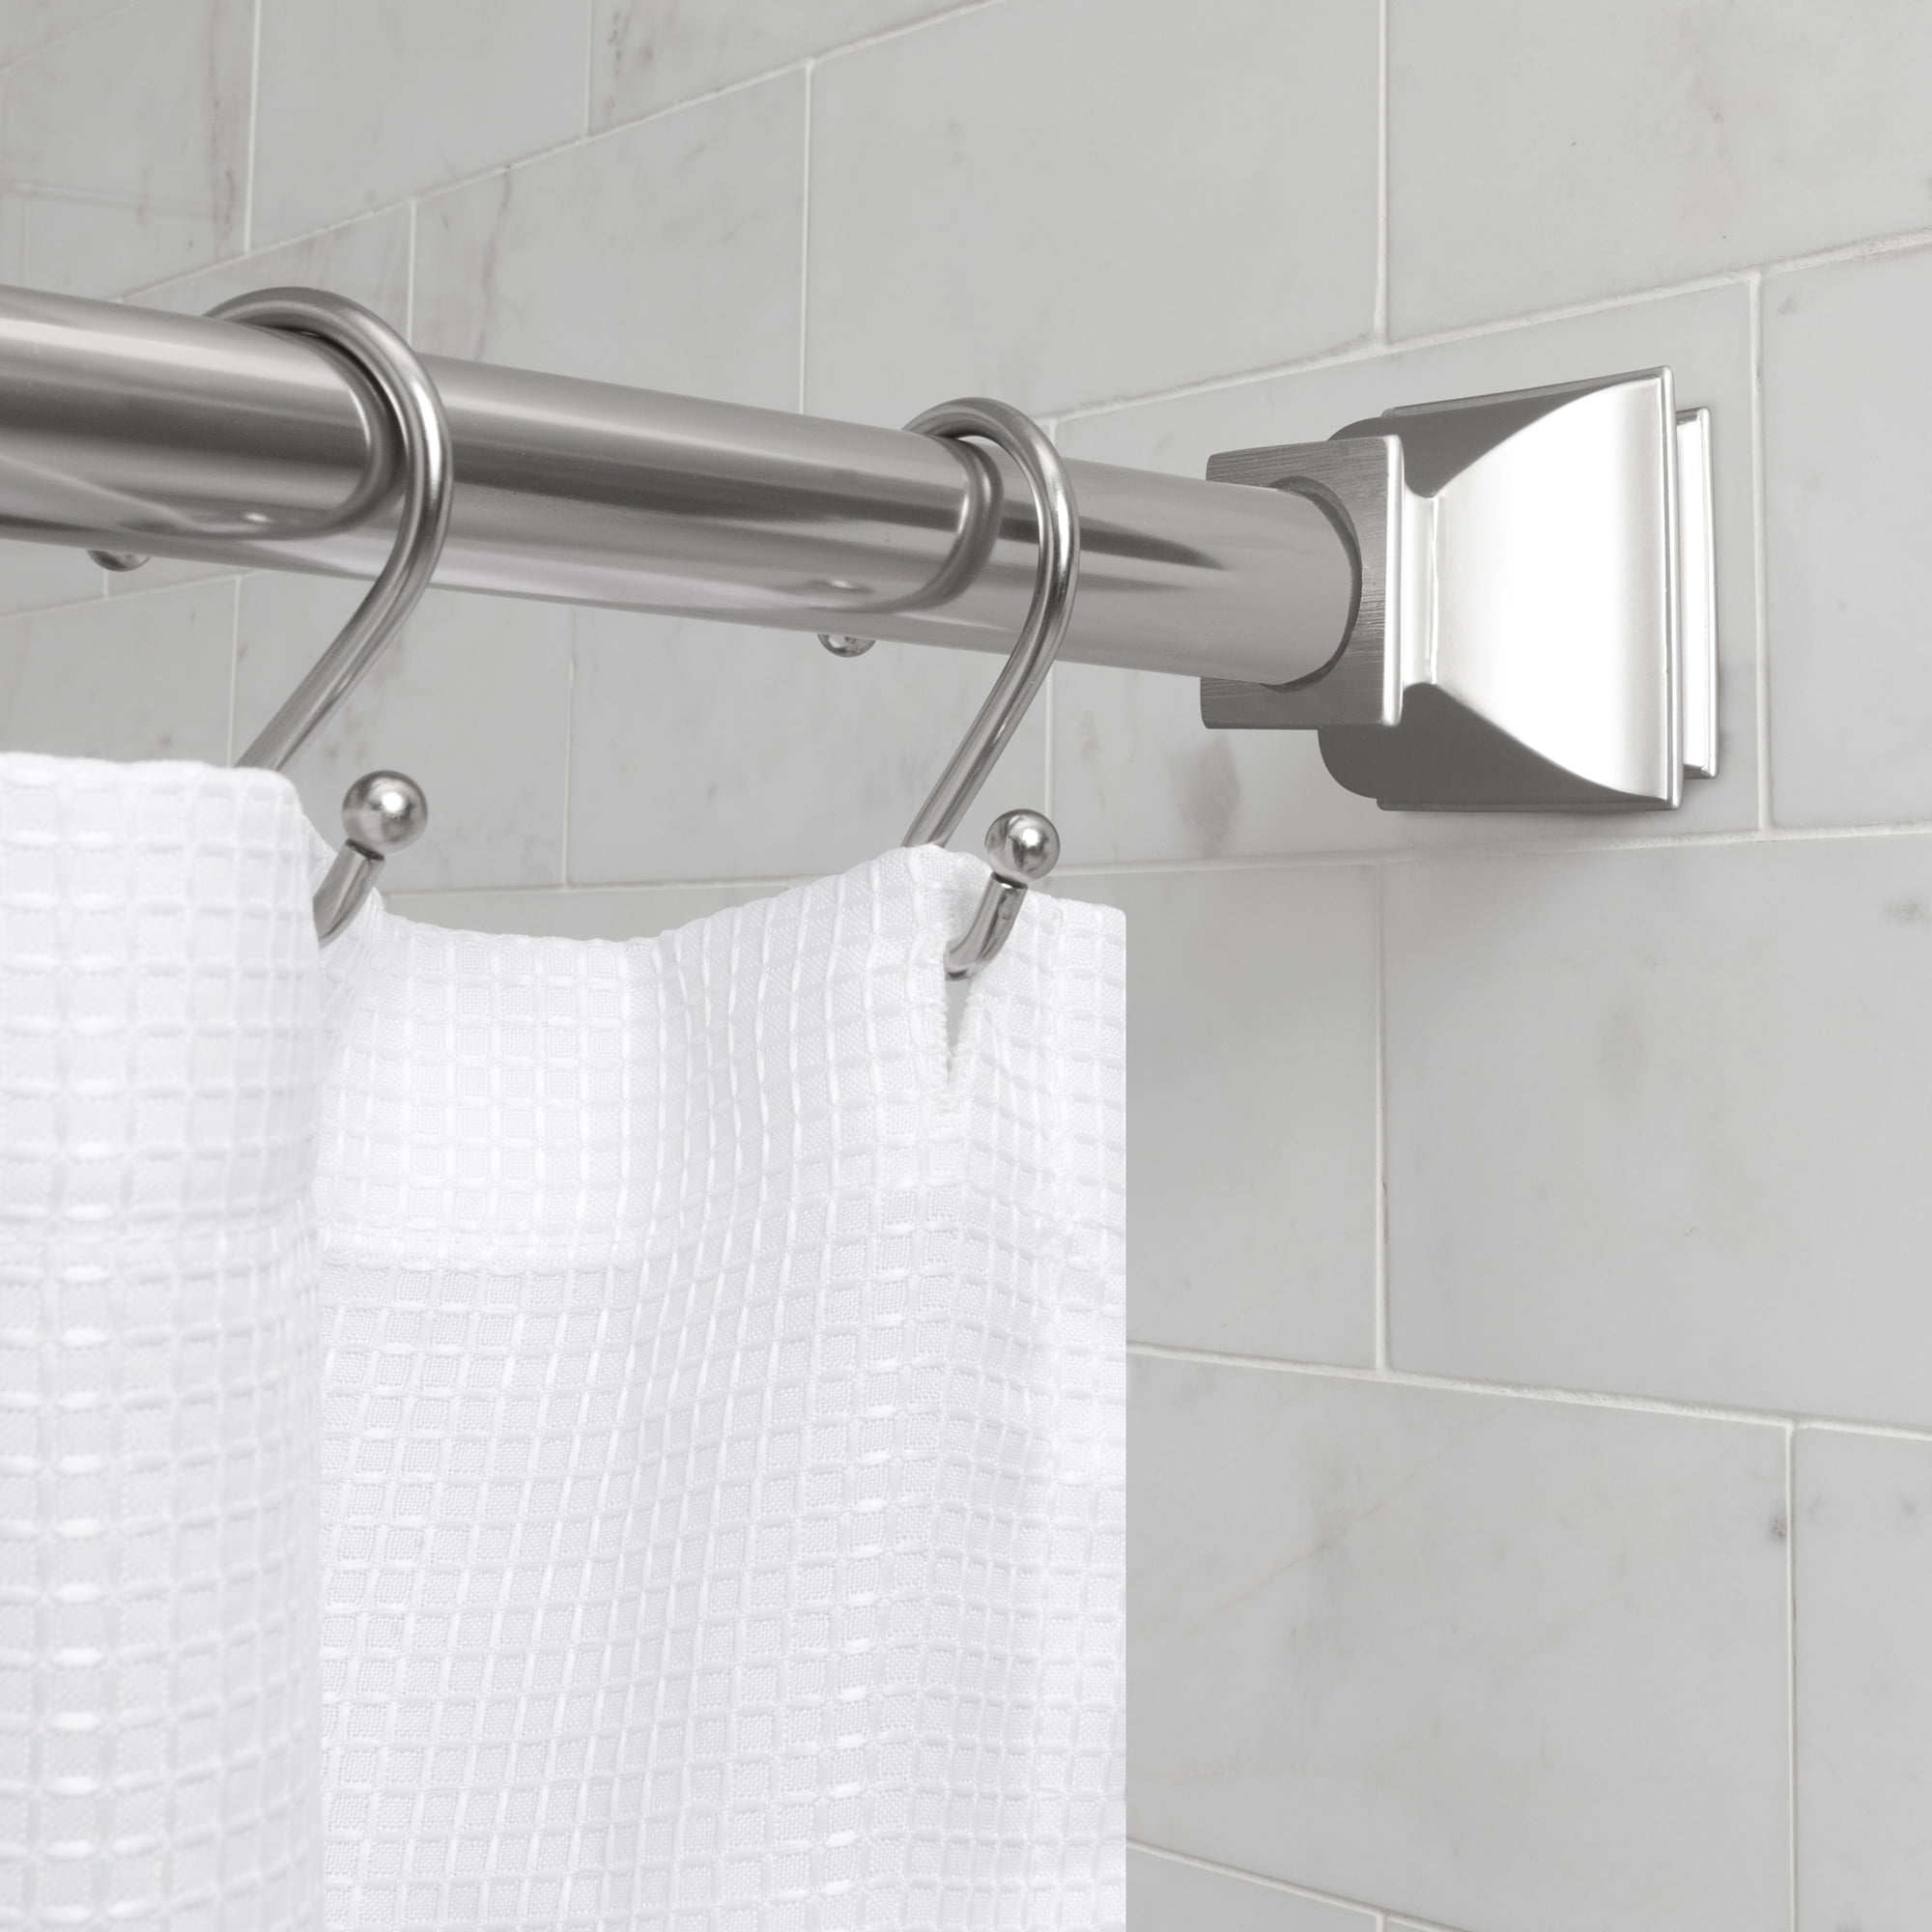 Aluminum Square Shower Tension Rod, How To Fix Shower Curtain Tension Rod